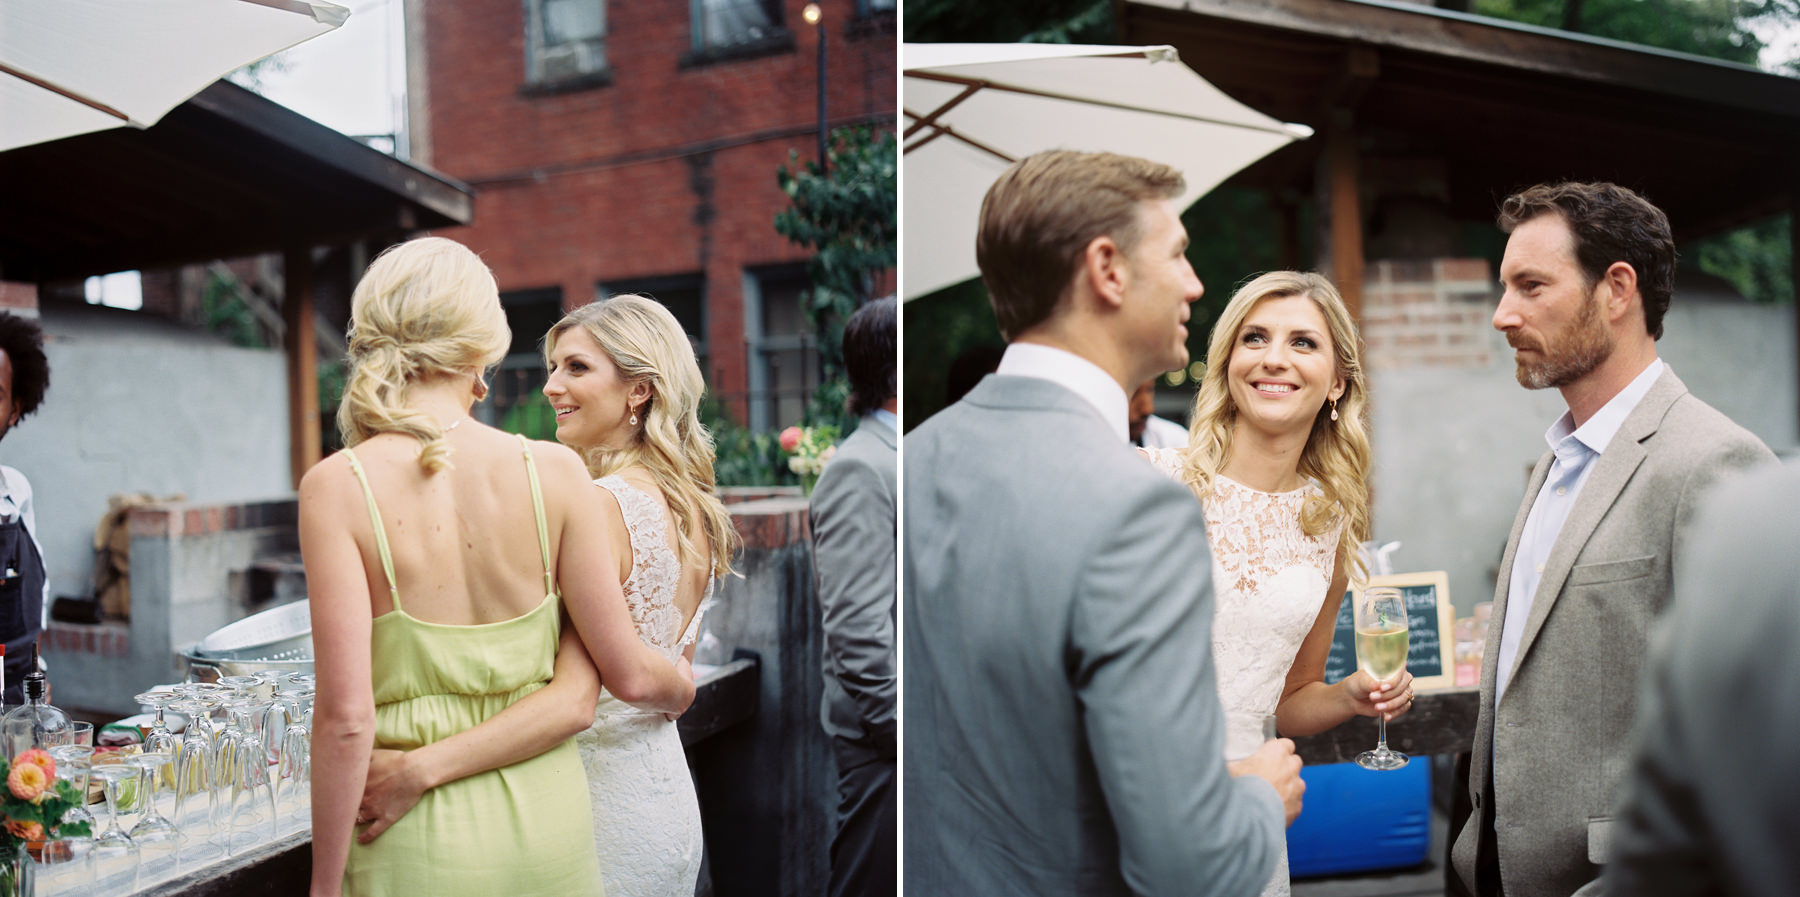 241-wedding-reception-in-the-alley-outside-the-corson-building.jpg